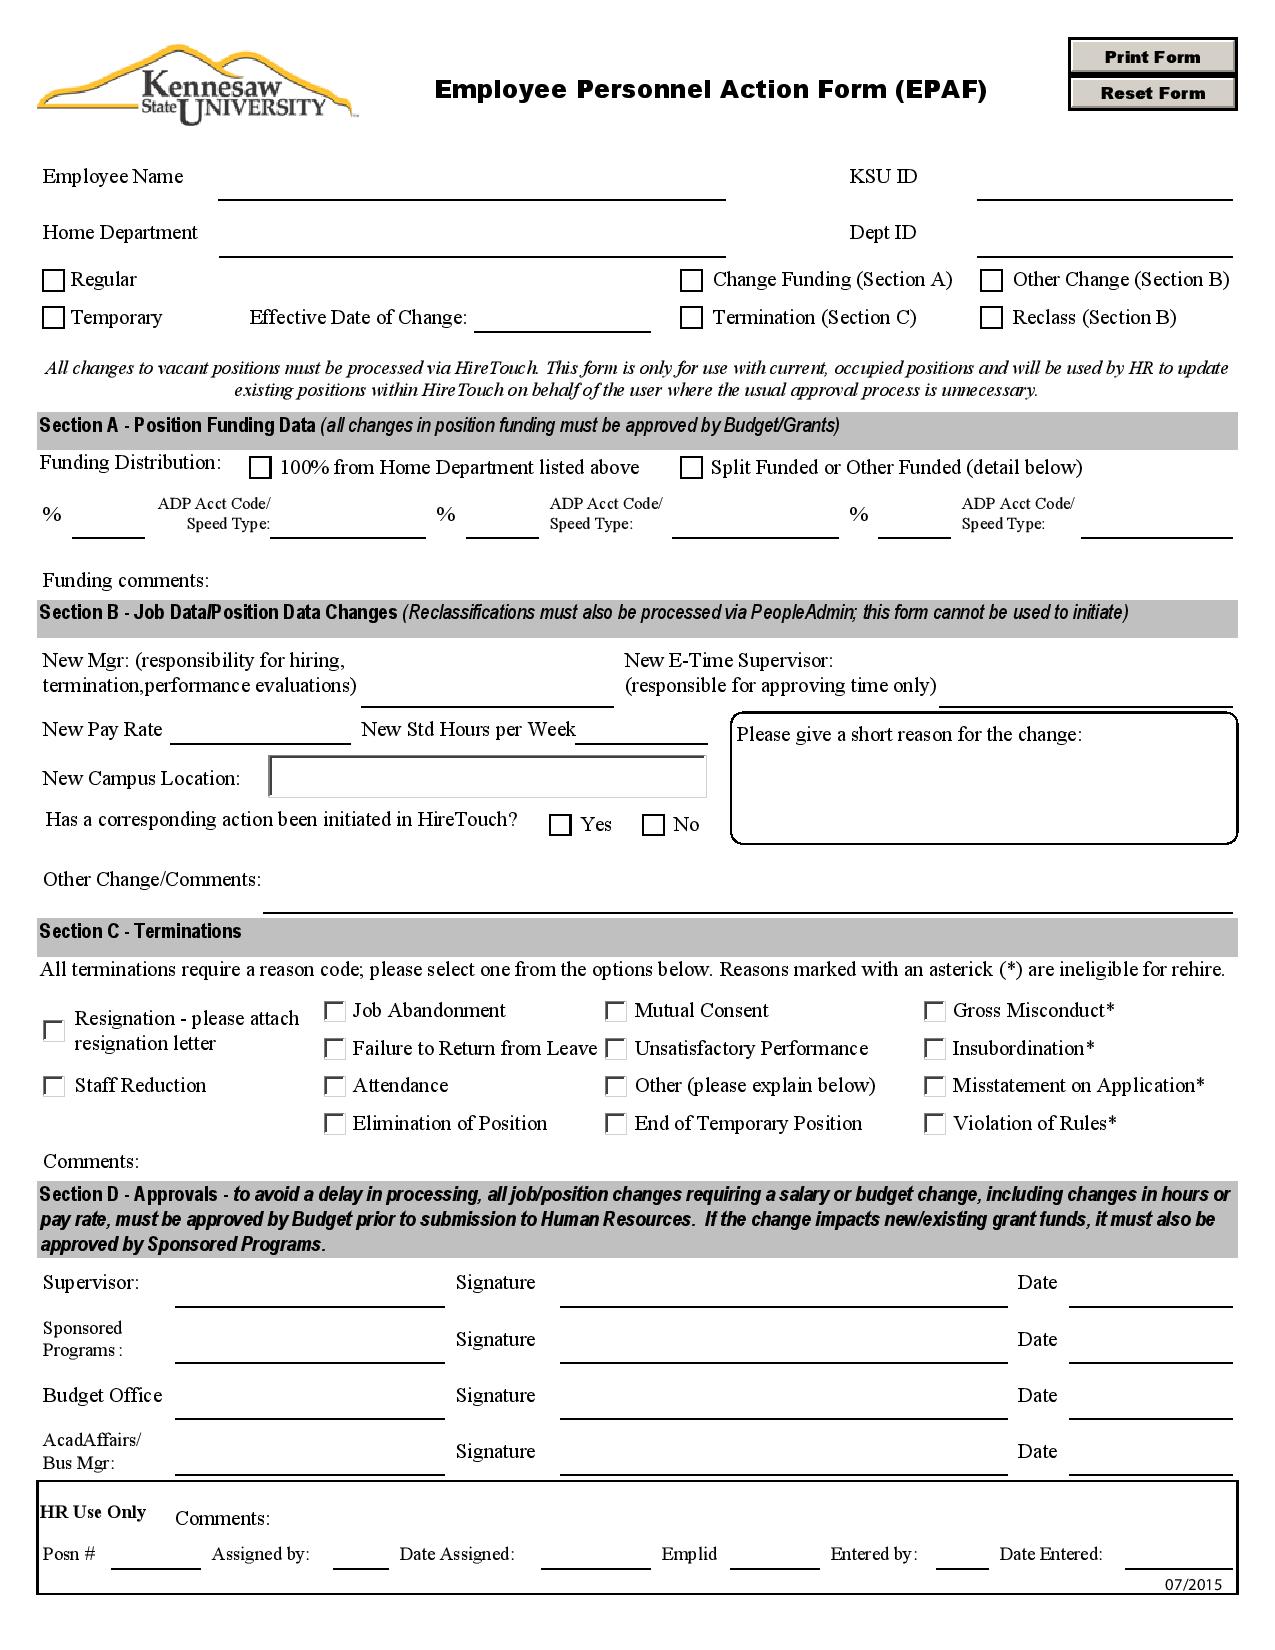 employee personnel action form epaf page 0011